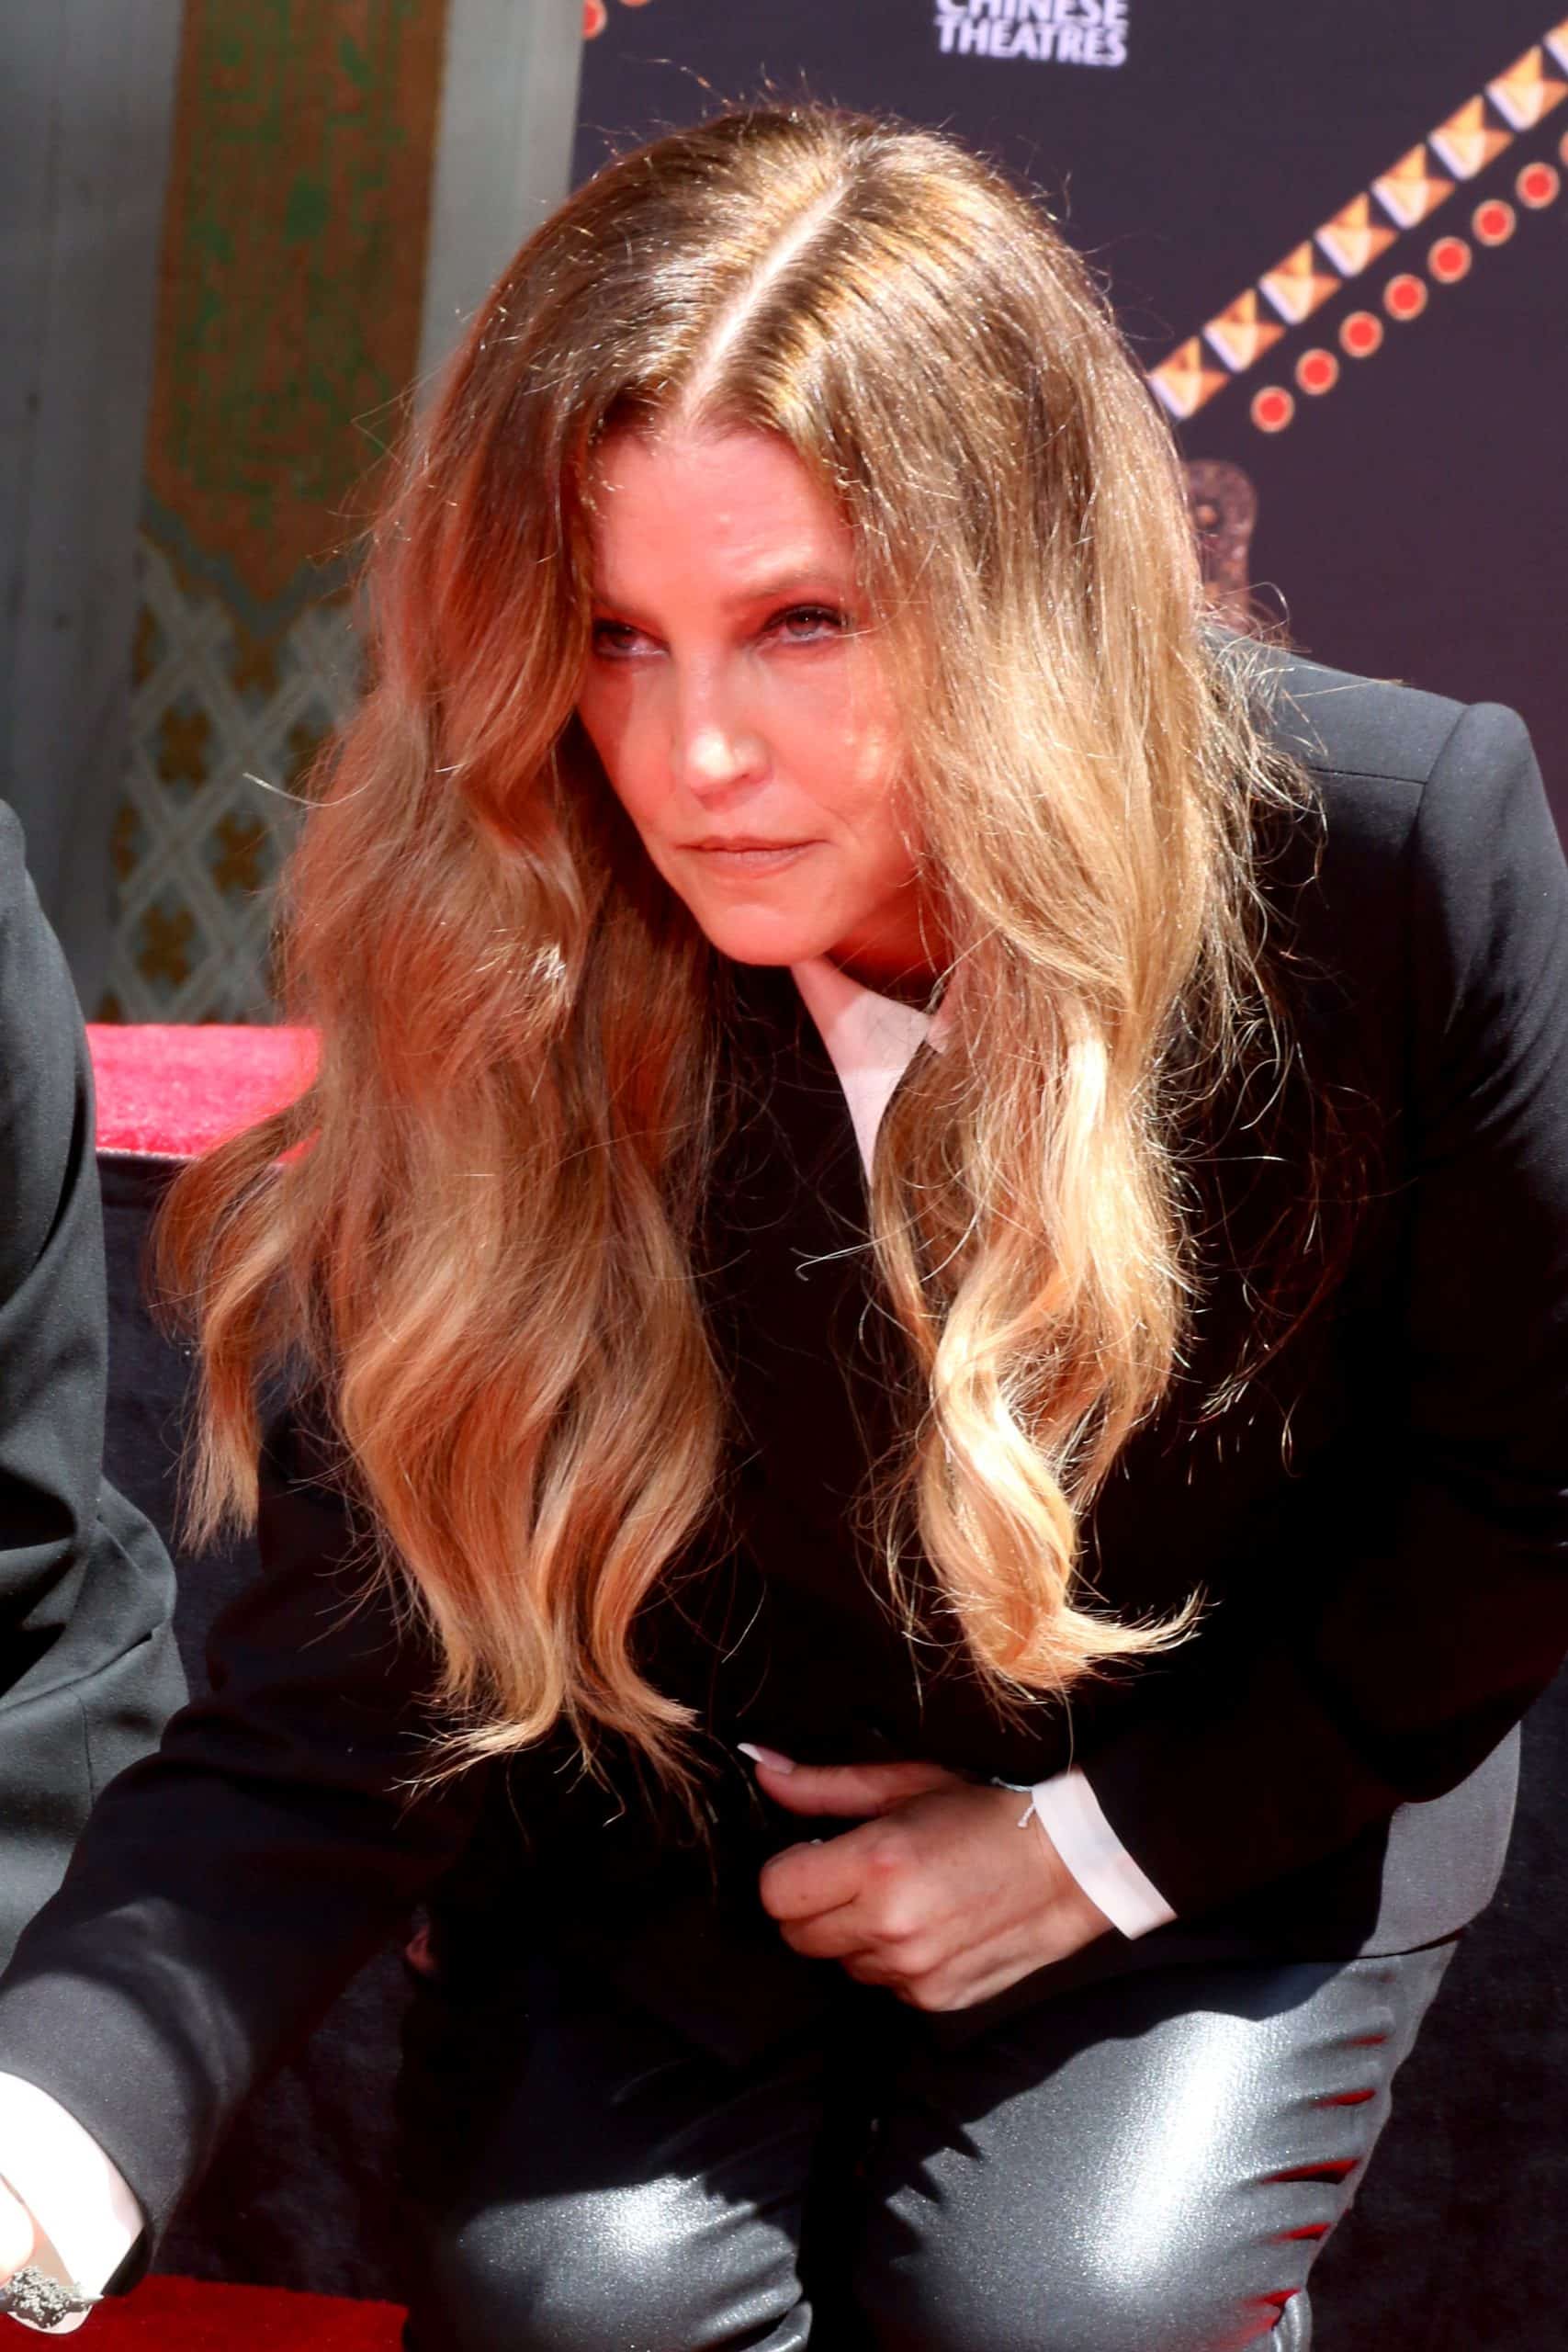 LOS ANGELES - JUN 21: Lisa Marie Presley at the Handprint Ceremony Honoring Priscilla Presley, Lisa Marie Presley And Riley Keough at TCL Chinese Theater IMAX on June 21, 2022 in Los Angeles, CA